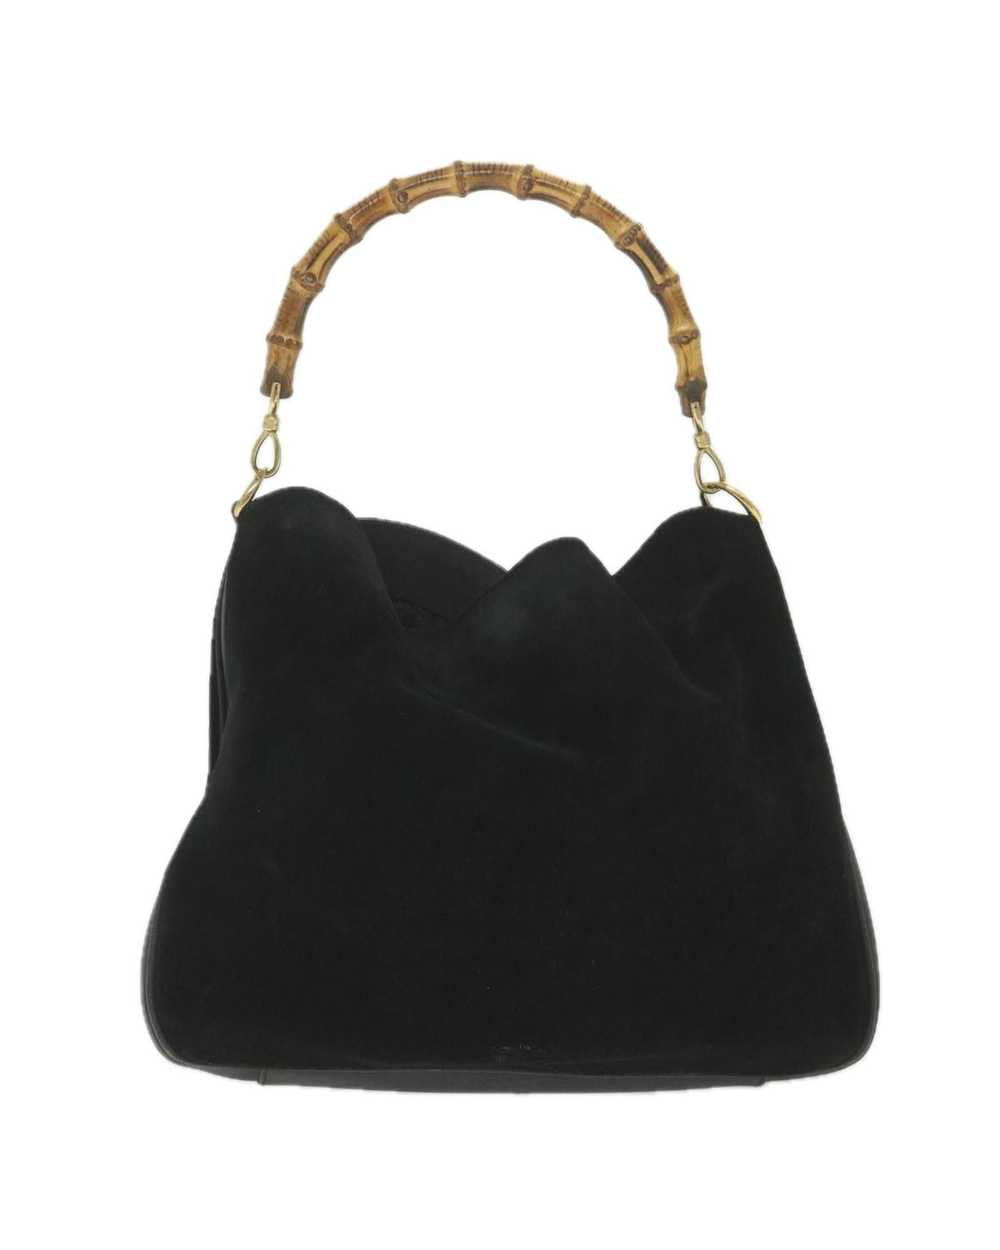 Gucci Black Suede Shoulder Bag with Bamboo Handle - image 3